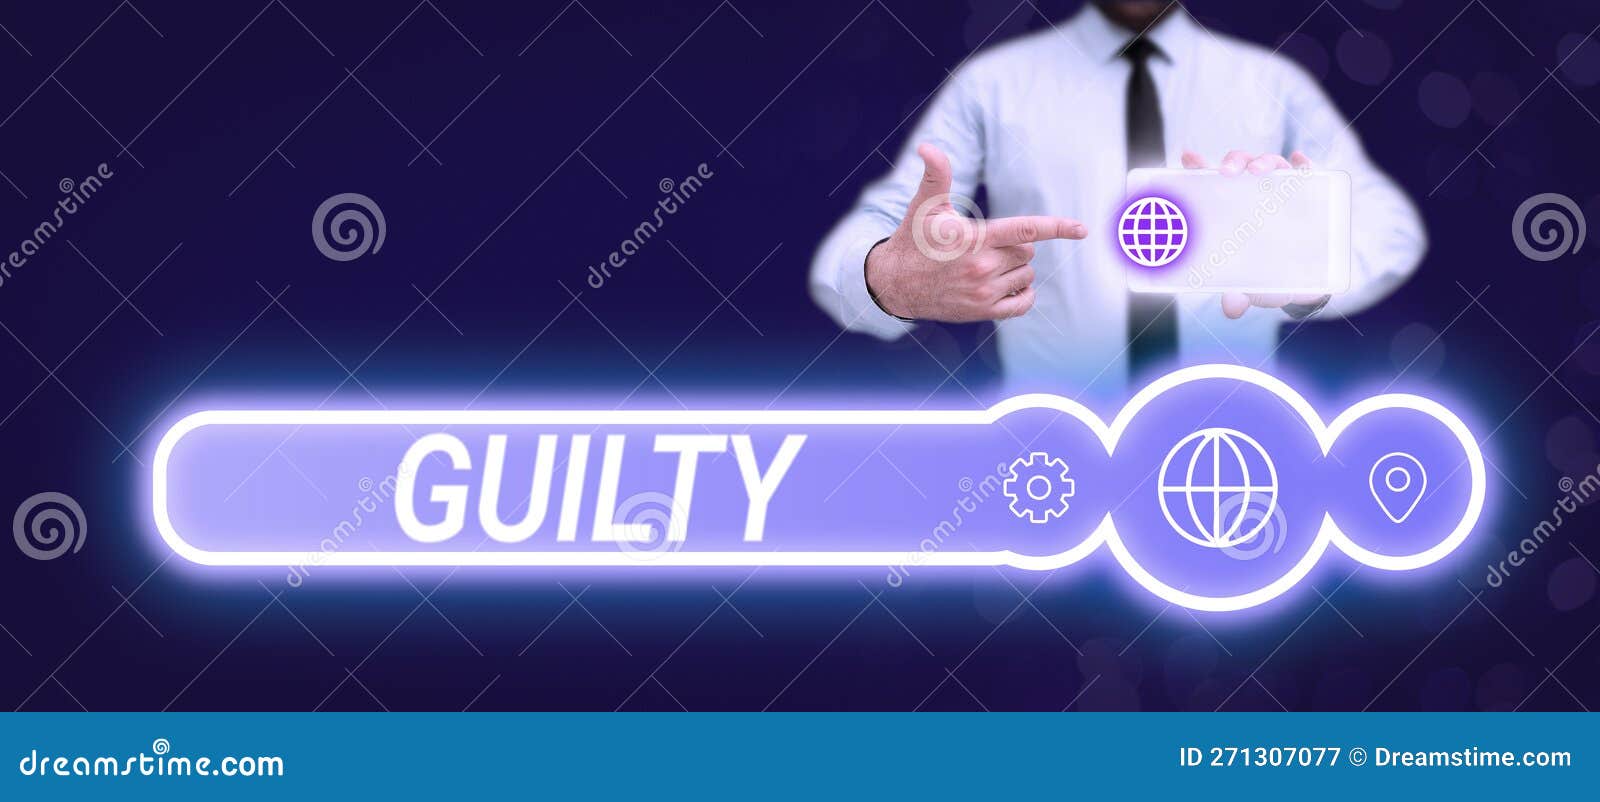 text sign showing guilty. business idea culpable of or responsible for specified wrongdoing admitting action